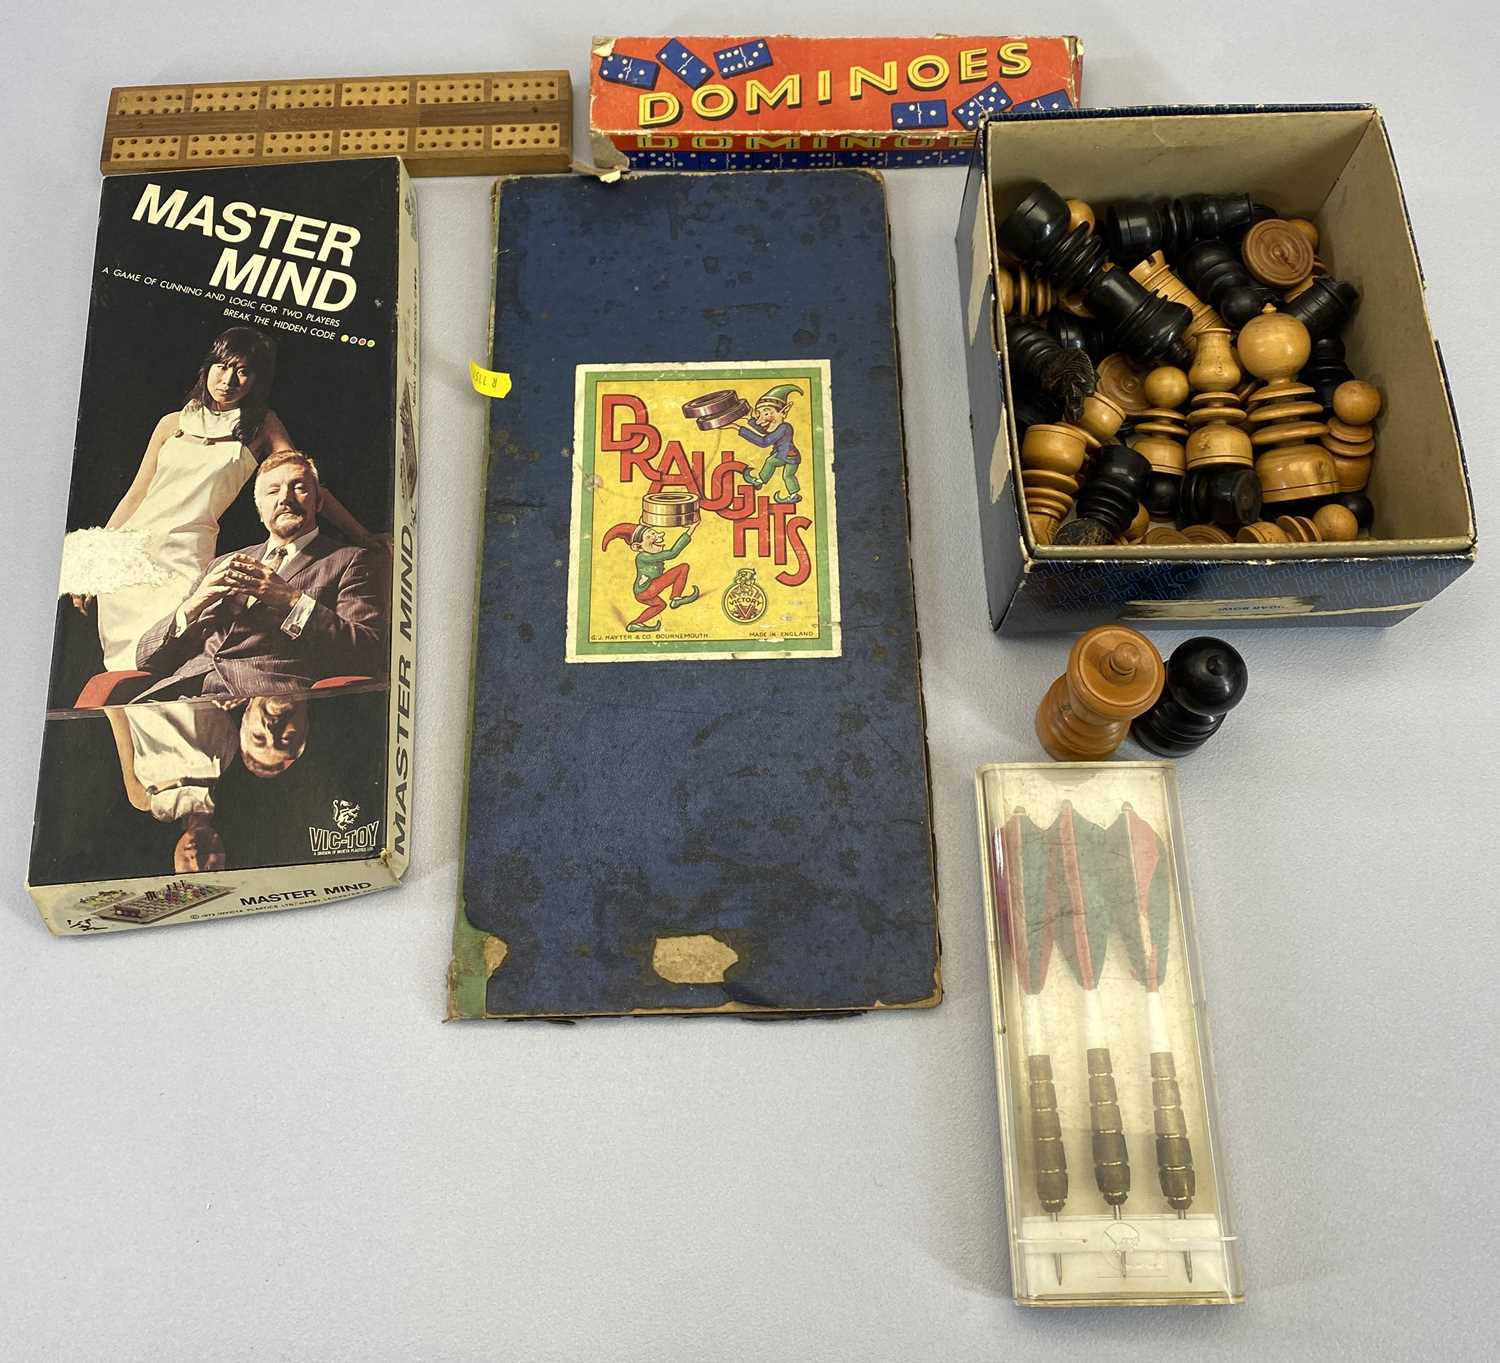 VICTORY DRAUGHTS BOARD, boxwood and ebony chess pieces, vintage Vic-toy Mastermind game, boxed